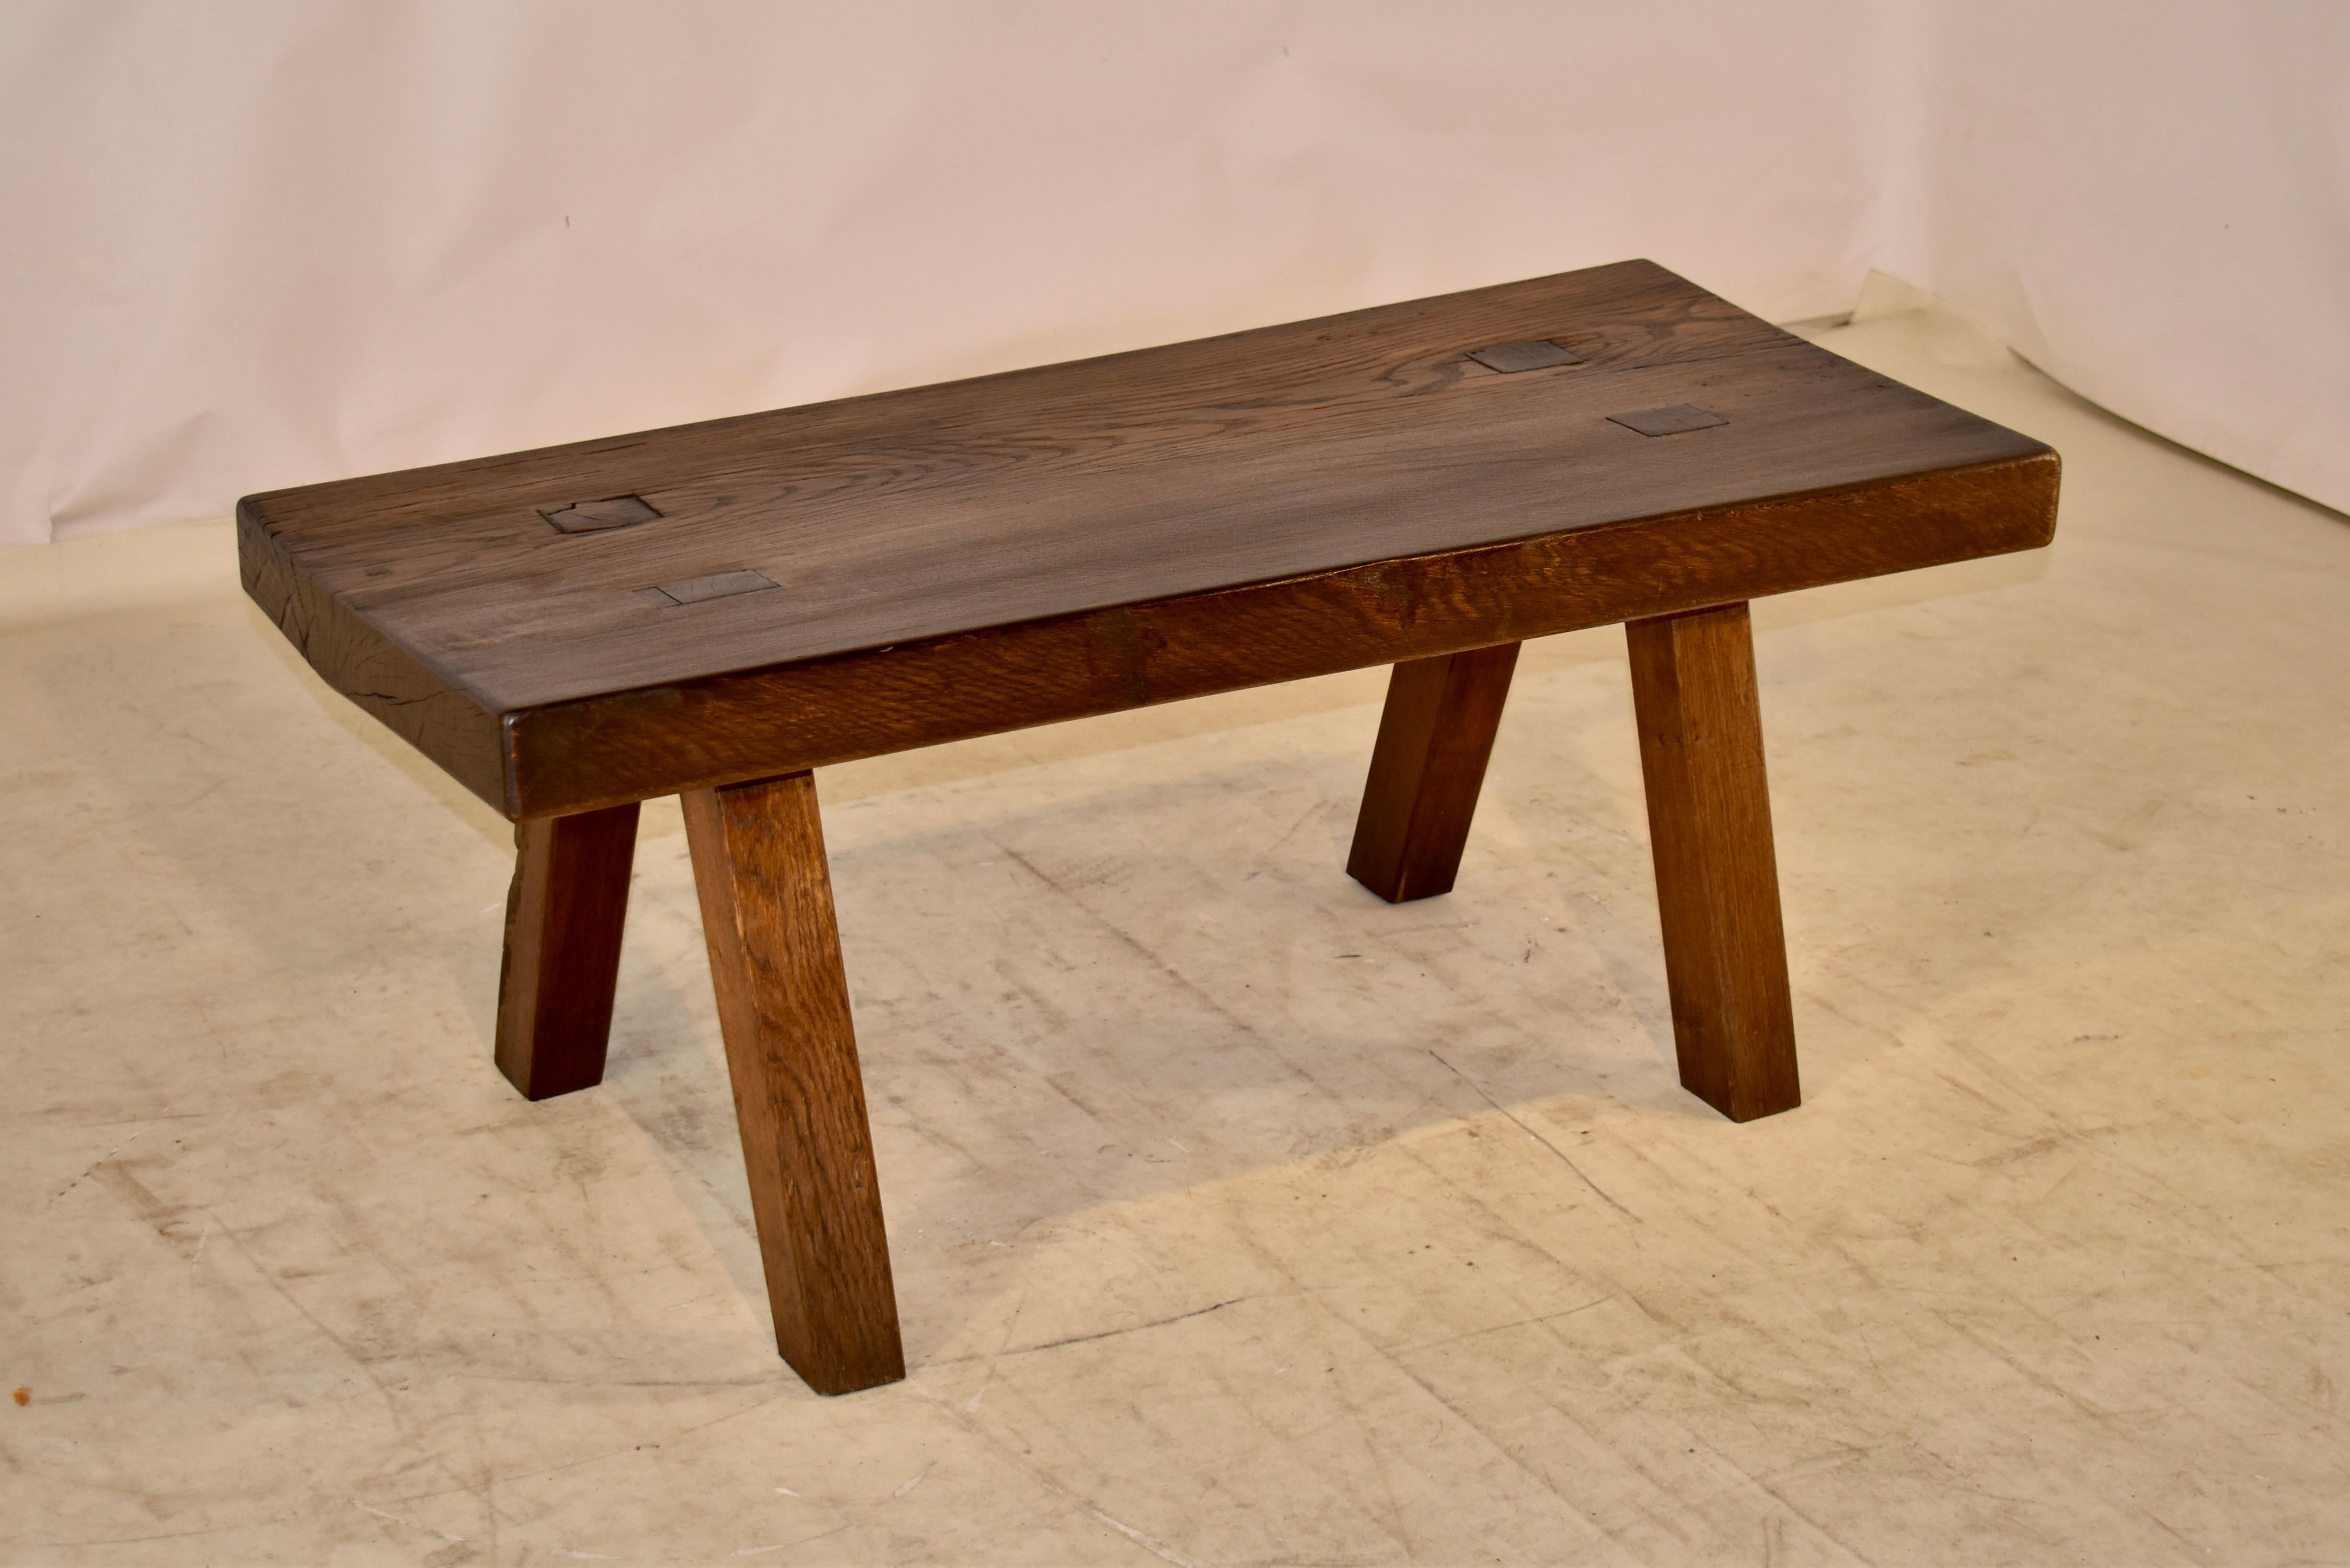 19th century oak coffee table from France with a thick 2.88 inch slab oak top. The top is fantastic and is set on four primitive block type legs, which are splayed and paged into the top. This is a lovely table that will compliment any type of decor.